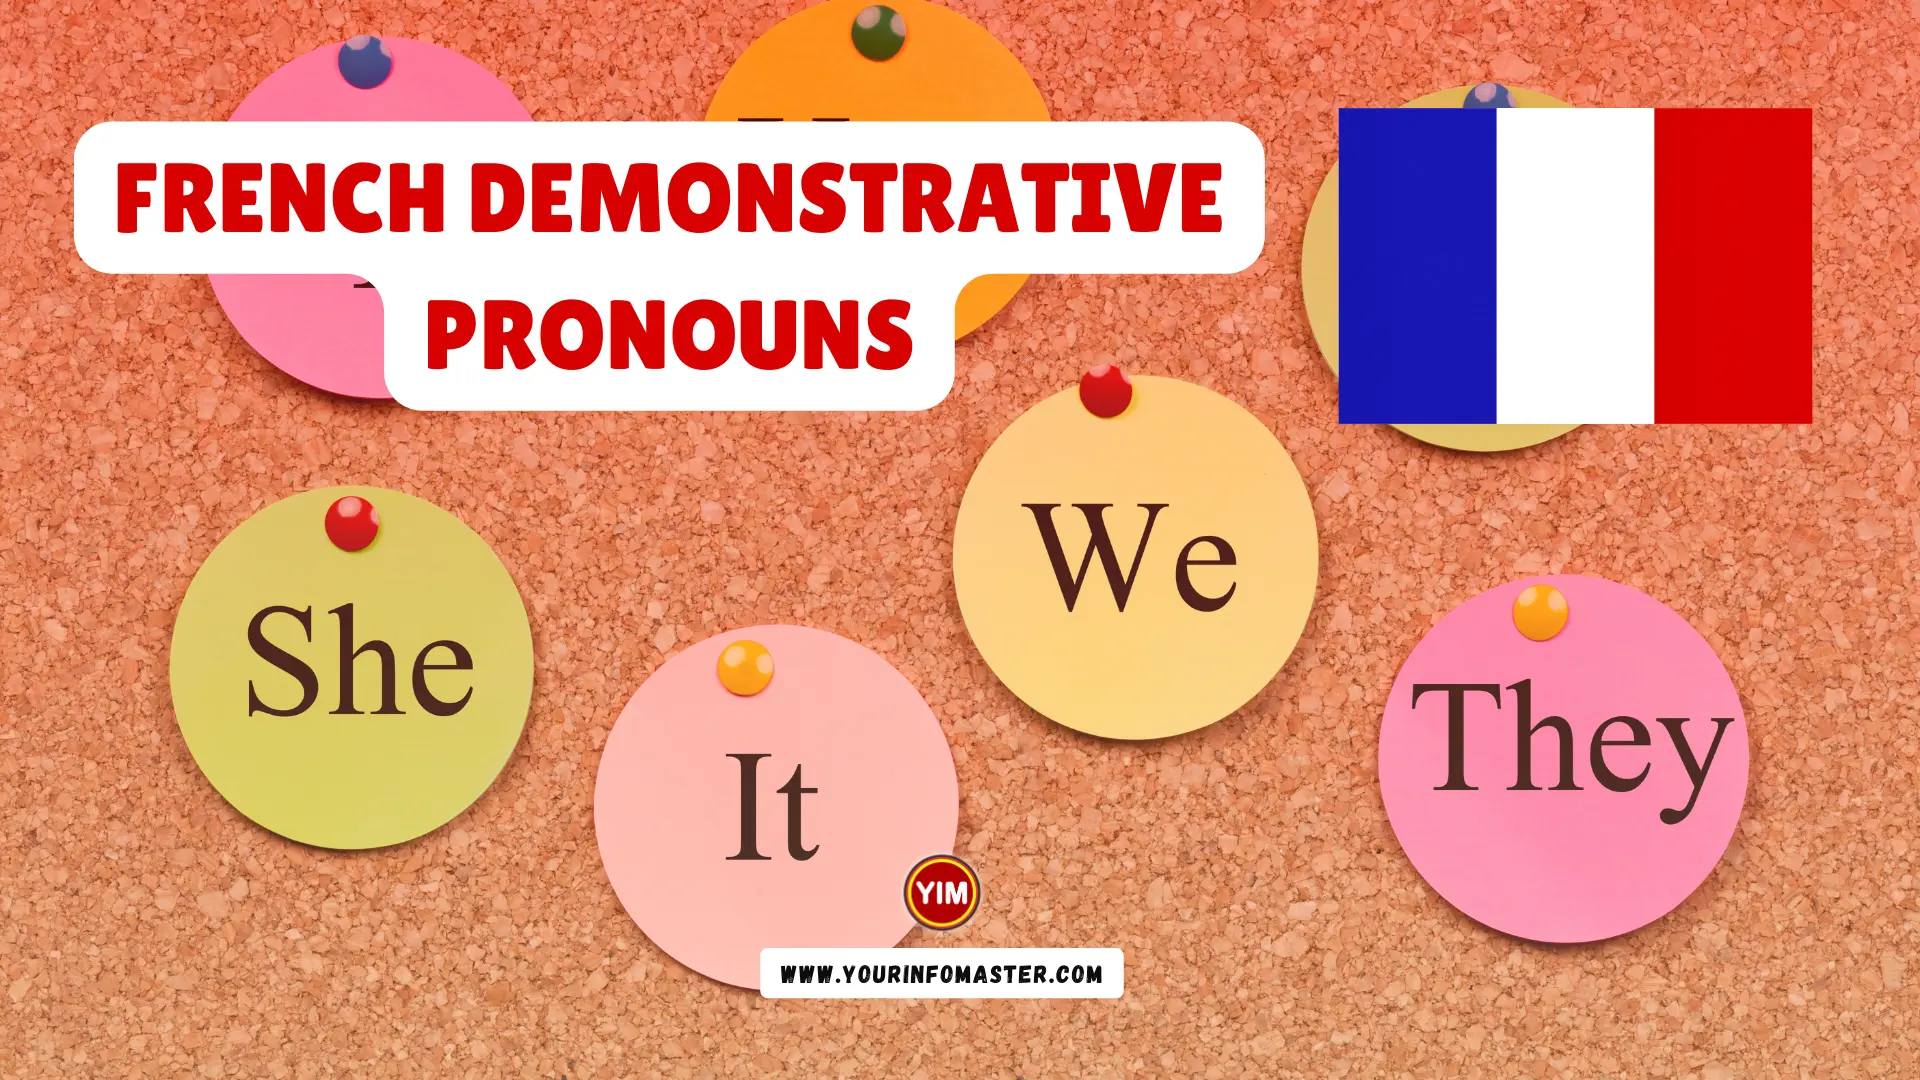 In this comprehensive blog post, I am going to explain the French Demonstrative Pronouns (Pronoms démonstratifs)